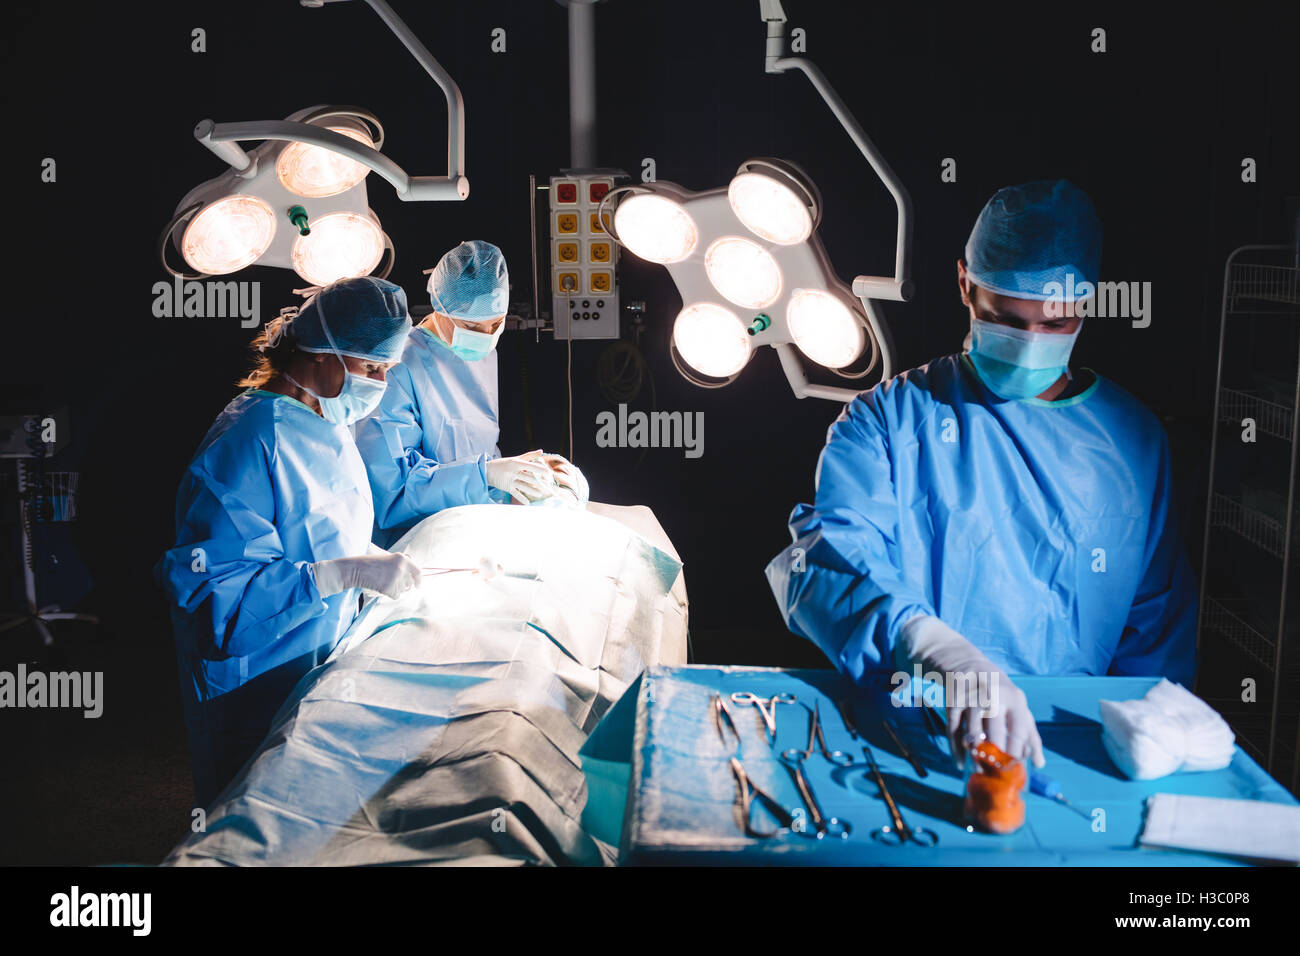 Surgeon taking a scissors from tray Stock Photo